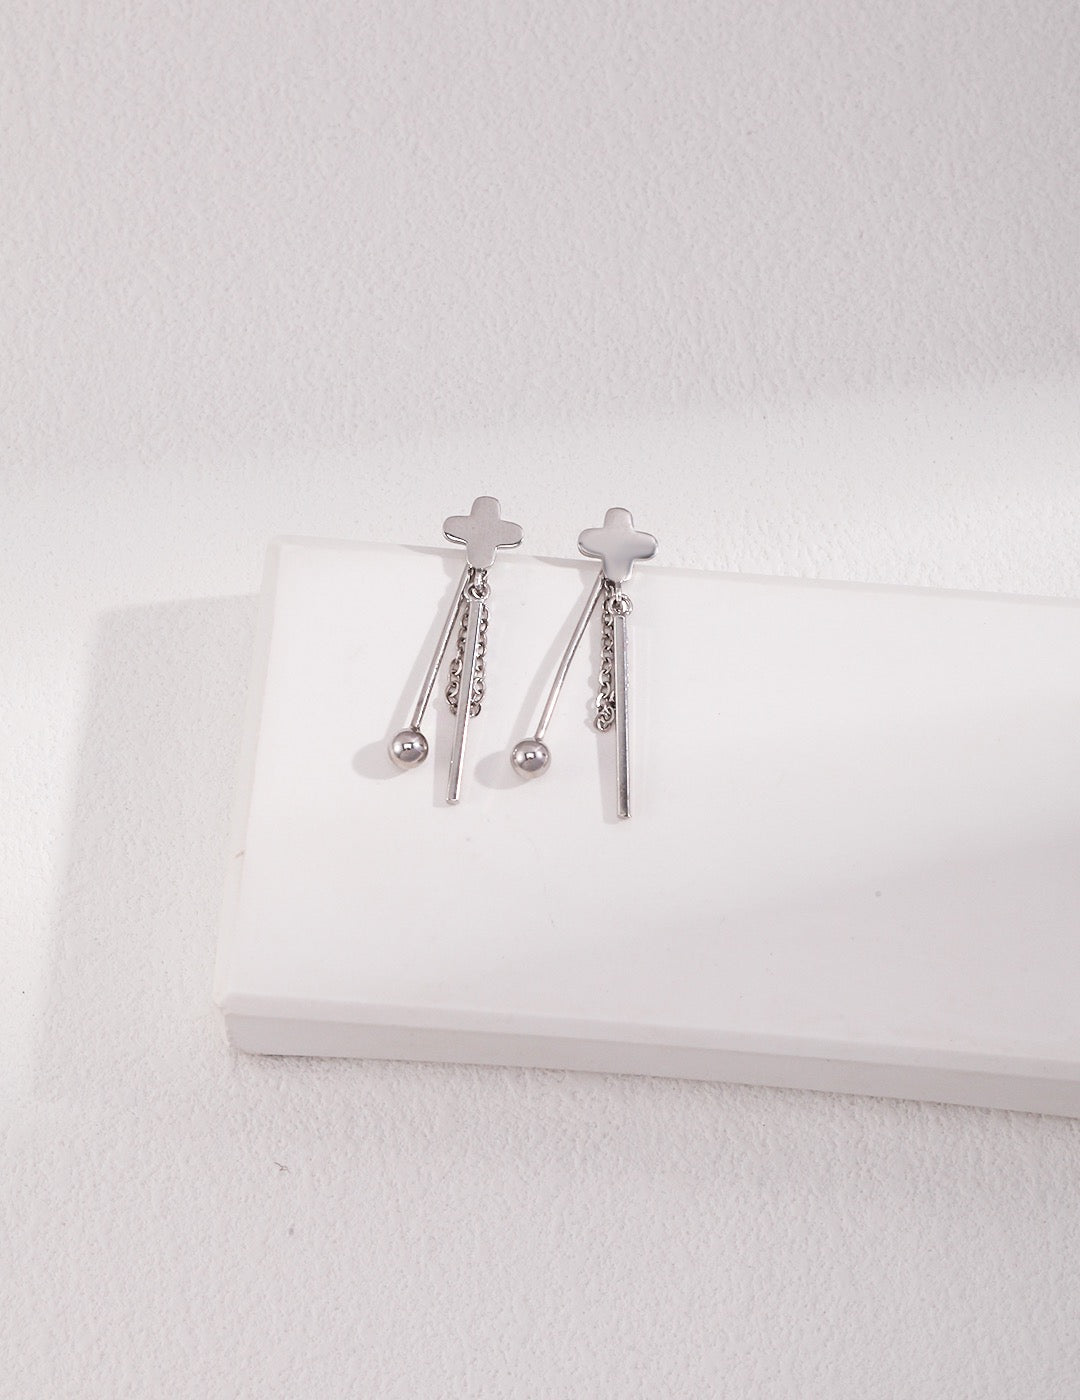 Elegant Cross Earrings - Experience the beauty and faith they represent - S925 Sterling Silver  - Celestial Bliss - Feel the divine charm and be effortlessly trendy - Perfect for any occasion, these stunning pieces will add a touch of elegance to your look